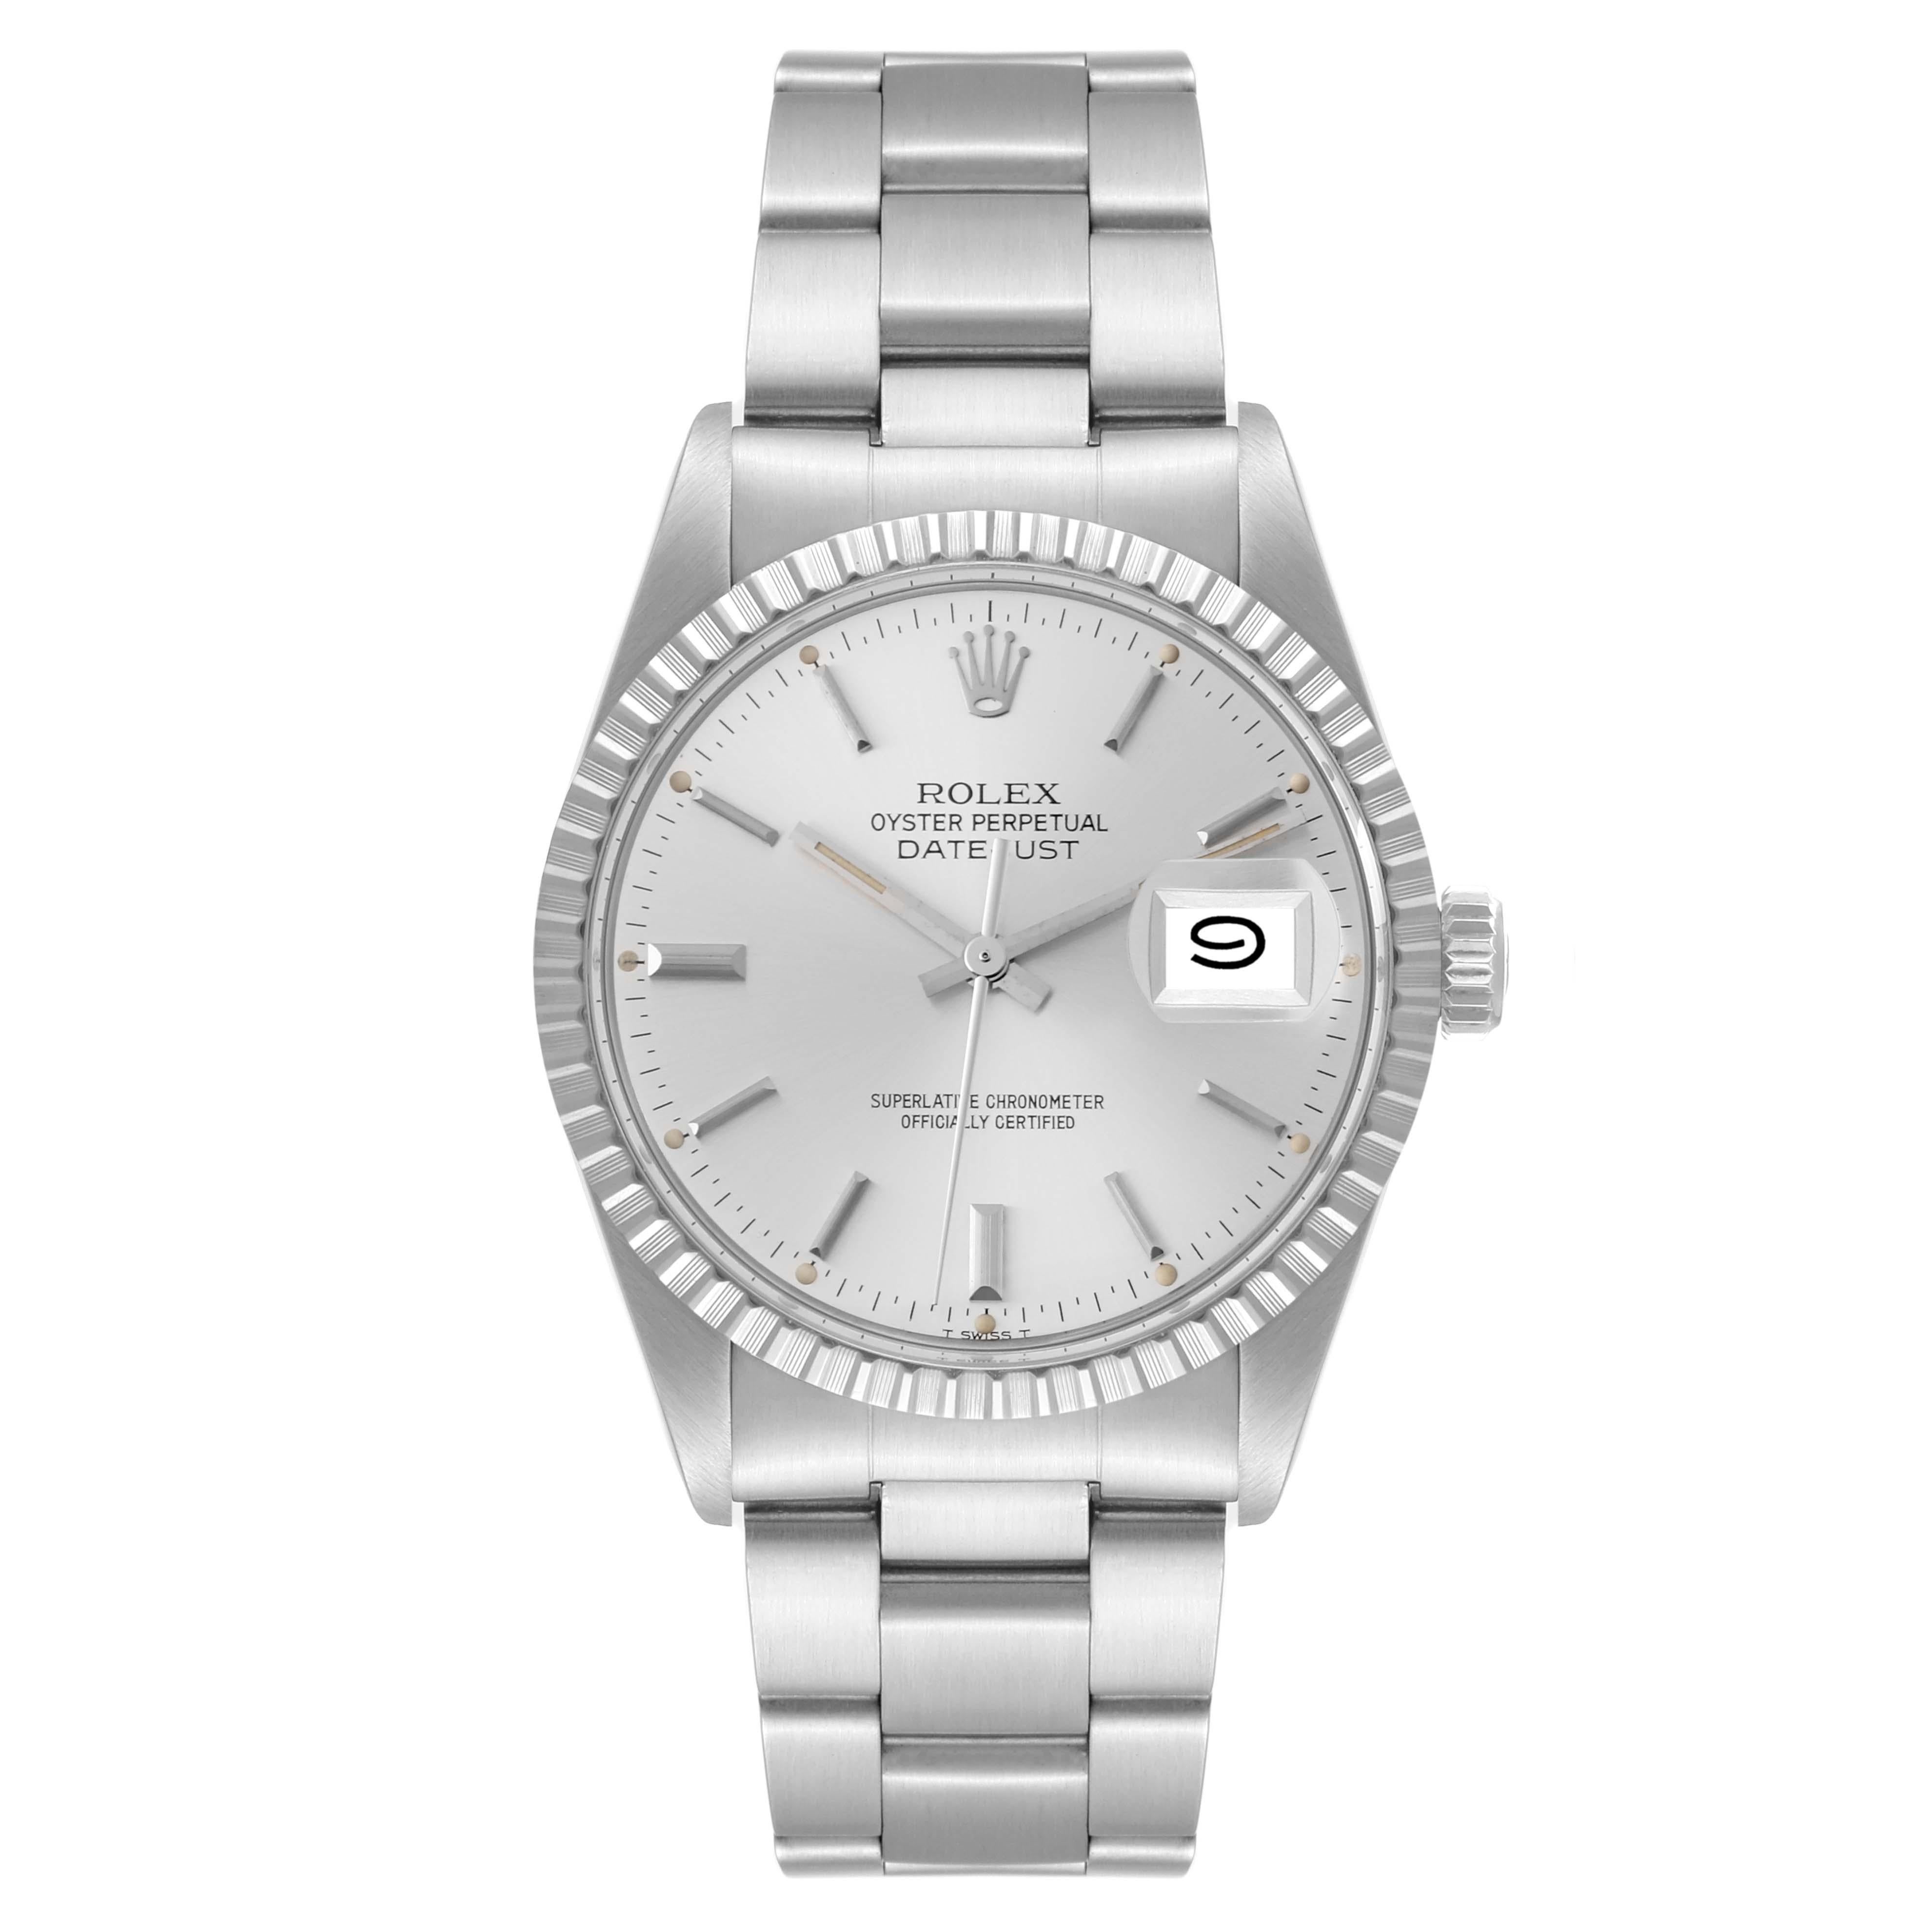 Rolex Datejust Silver Dial Vintage Steel Mens Watch 16030. Officially certified chronometer automatic self-winding movement. Stainless steel oyster case 36 mm in diameter. Rolex logo on a crown. Stainless steel engine turned bezel. Acrylic crystal